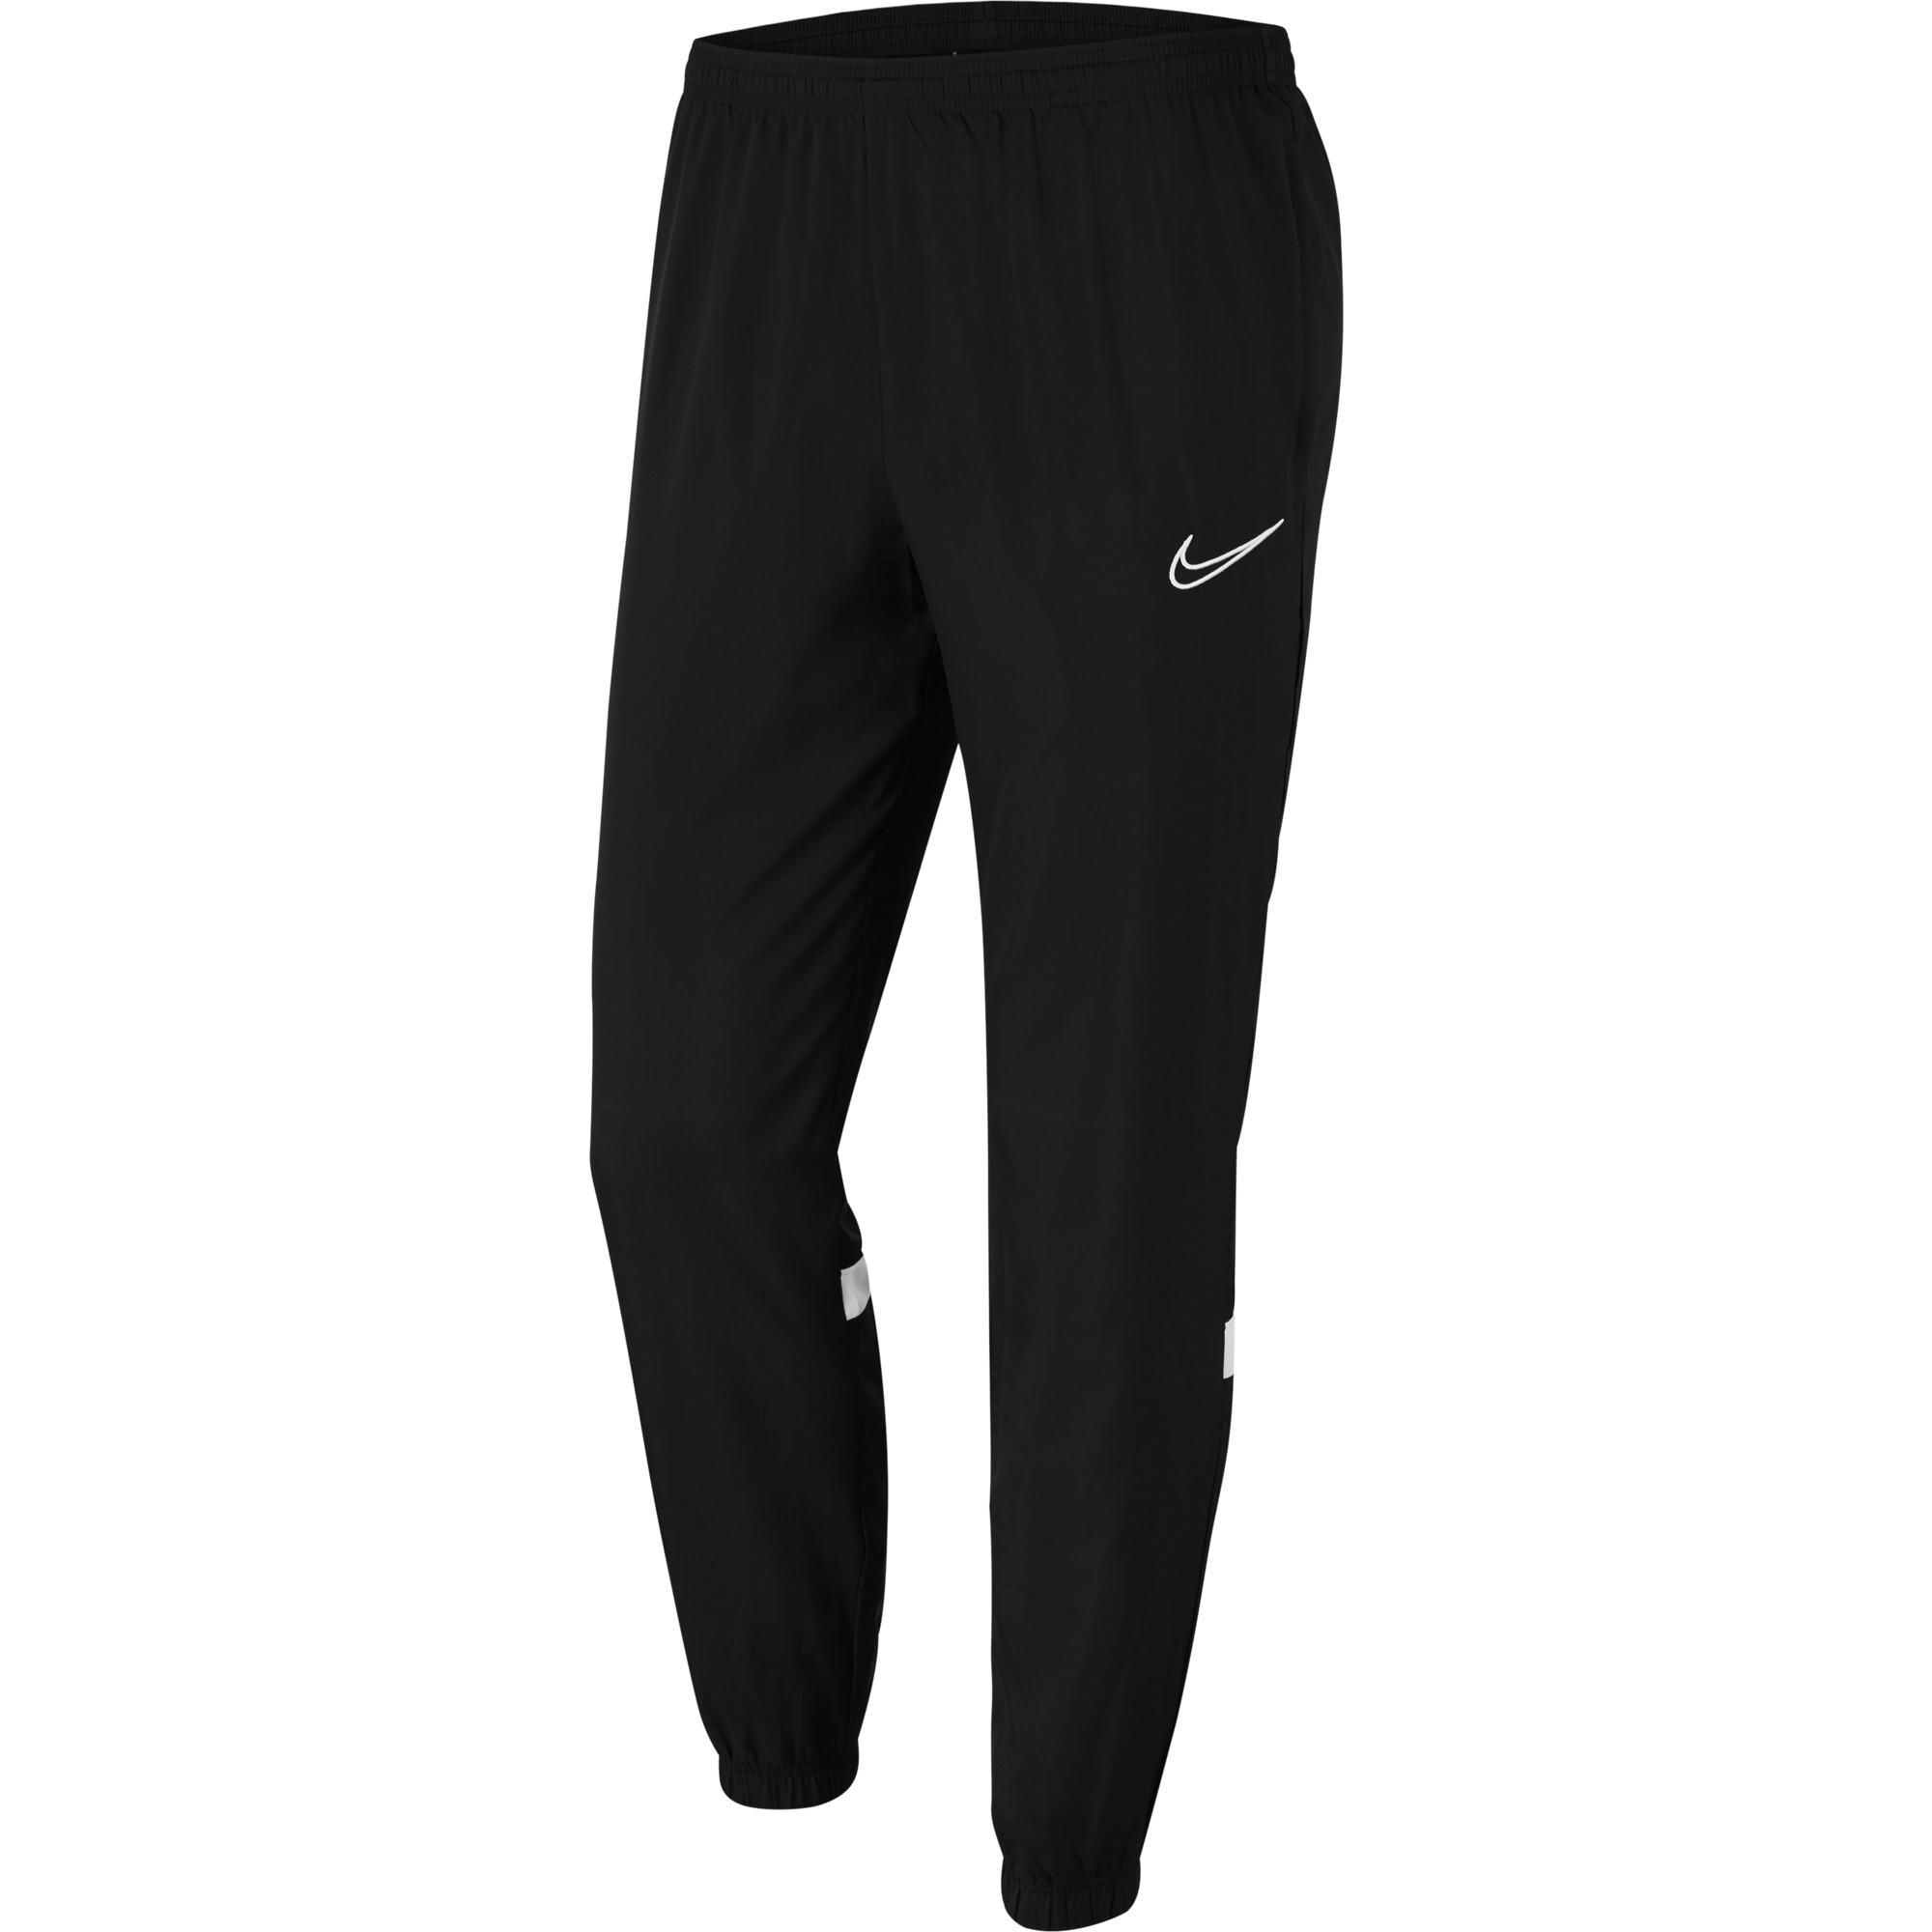 Academy 21 Woven Track Pant